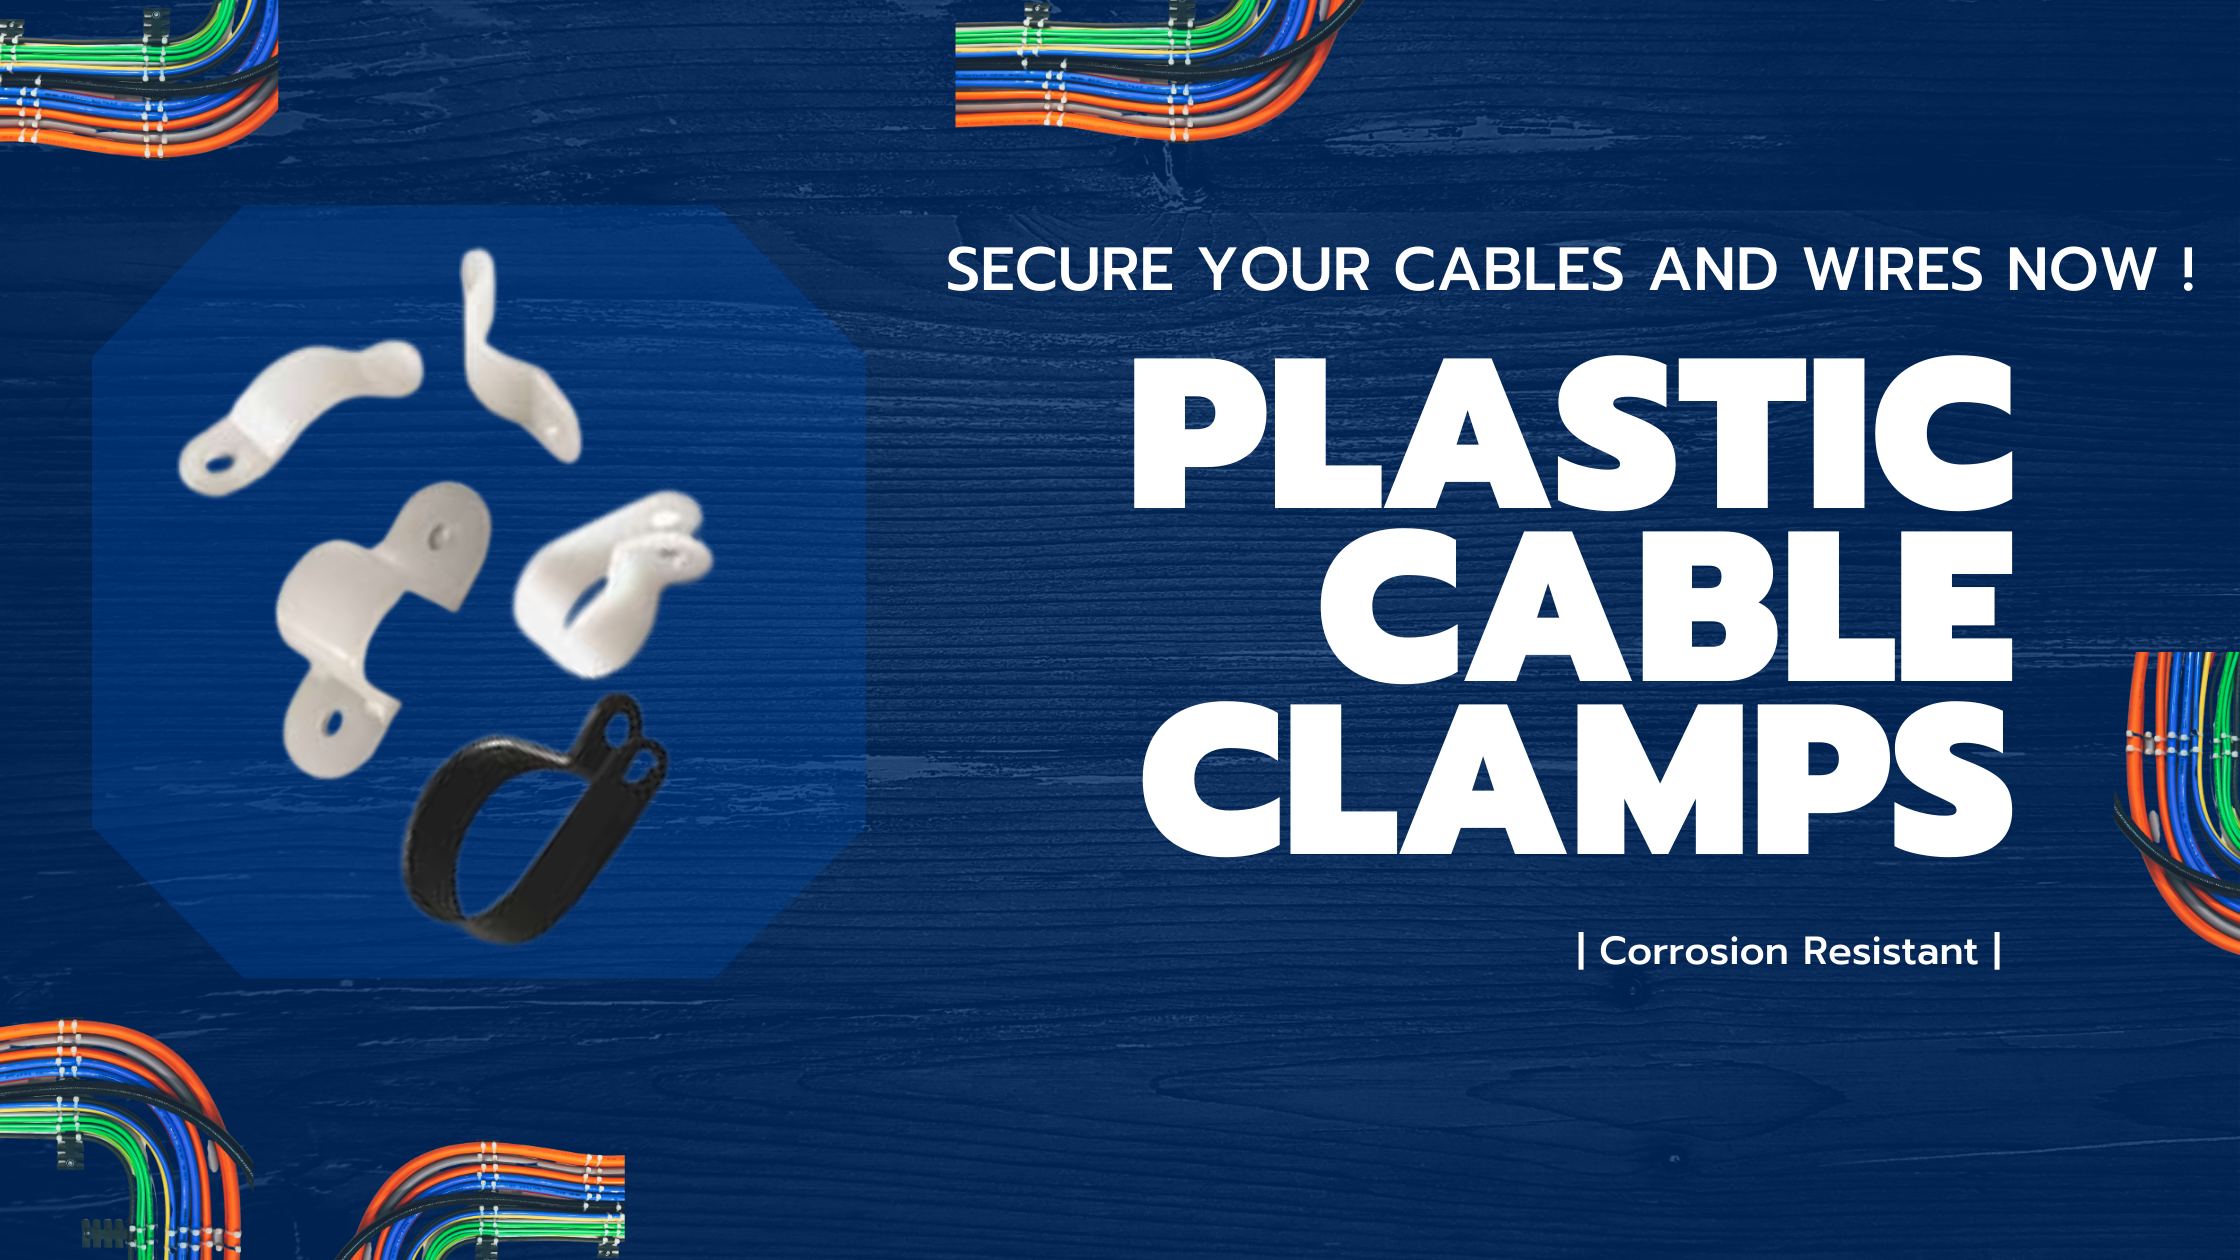 Corrosion Resistant Plastic Cable Clamps to Fasten Wires and Cables